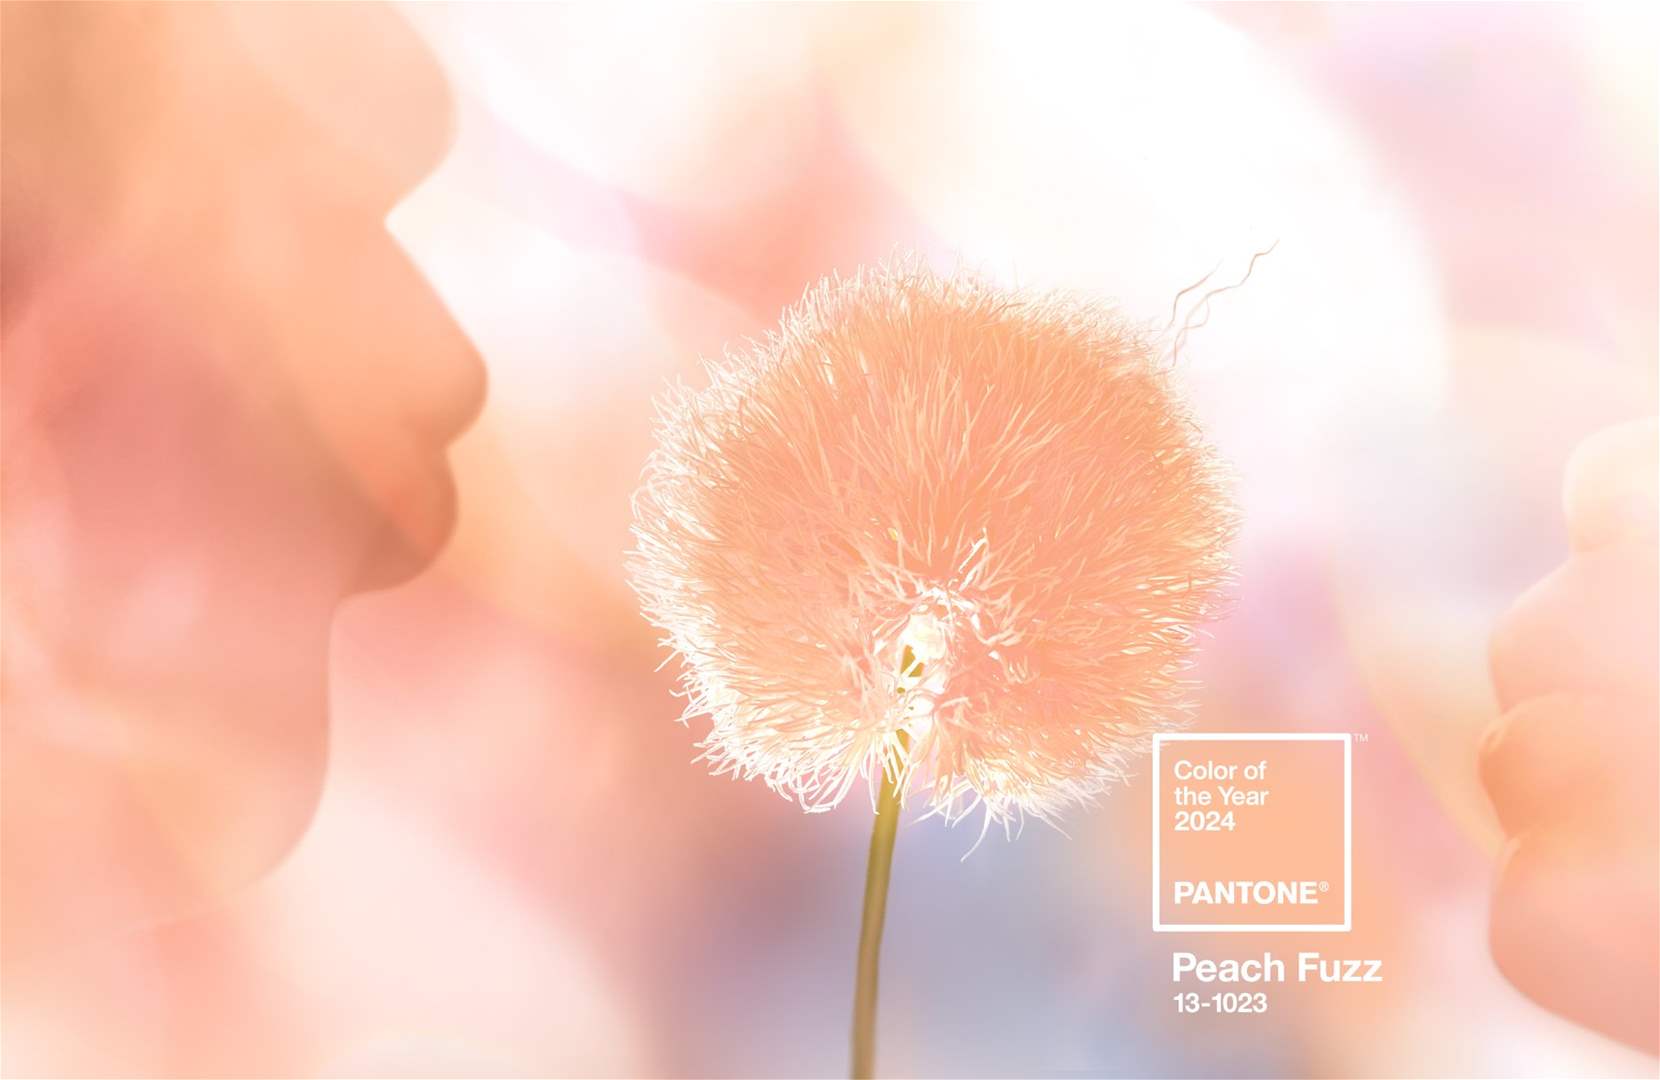 PANTONE 13-1023 Peach Fuzz as a Symbol of Human Connection